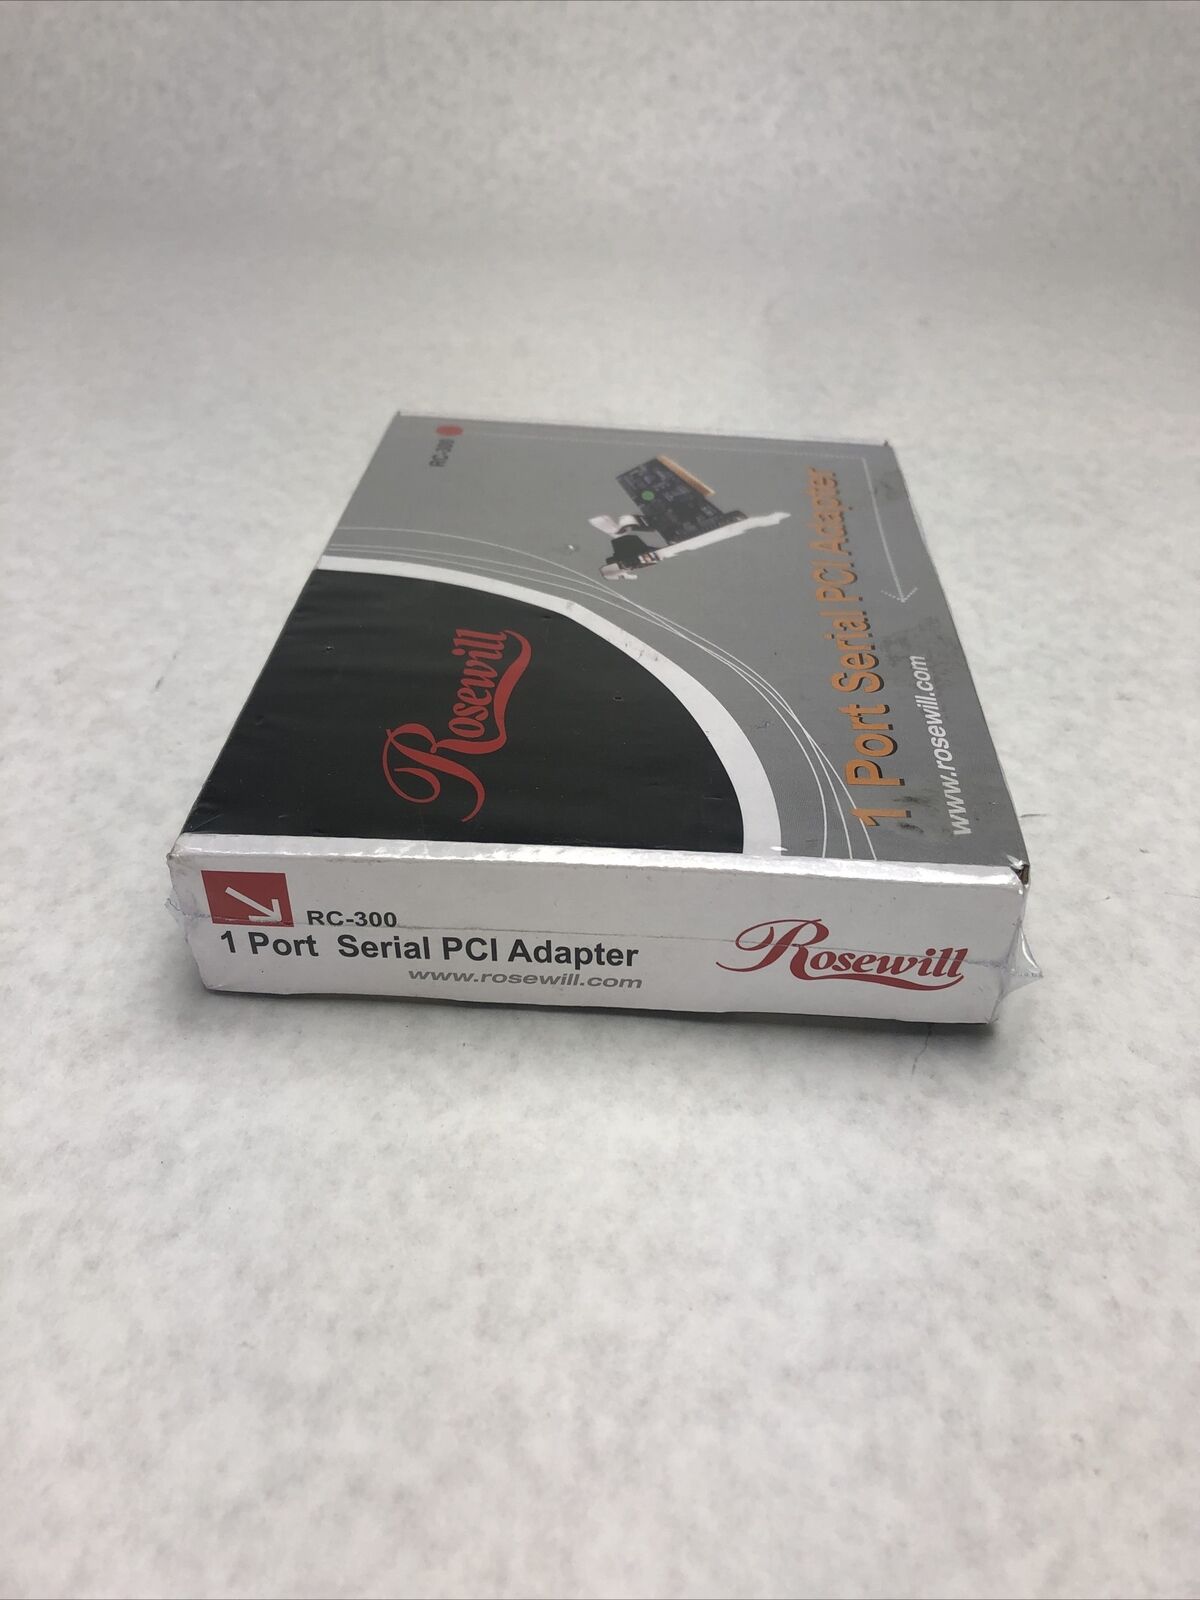 Rosewill RC-300 1 Port Serial PCI Adapter Sealed